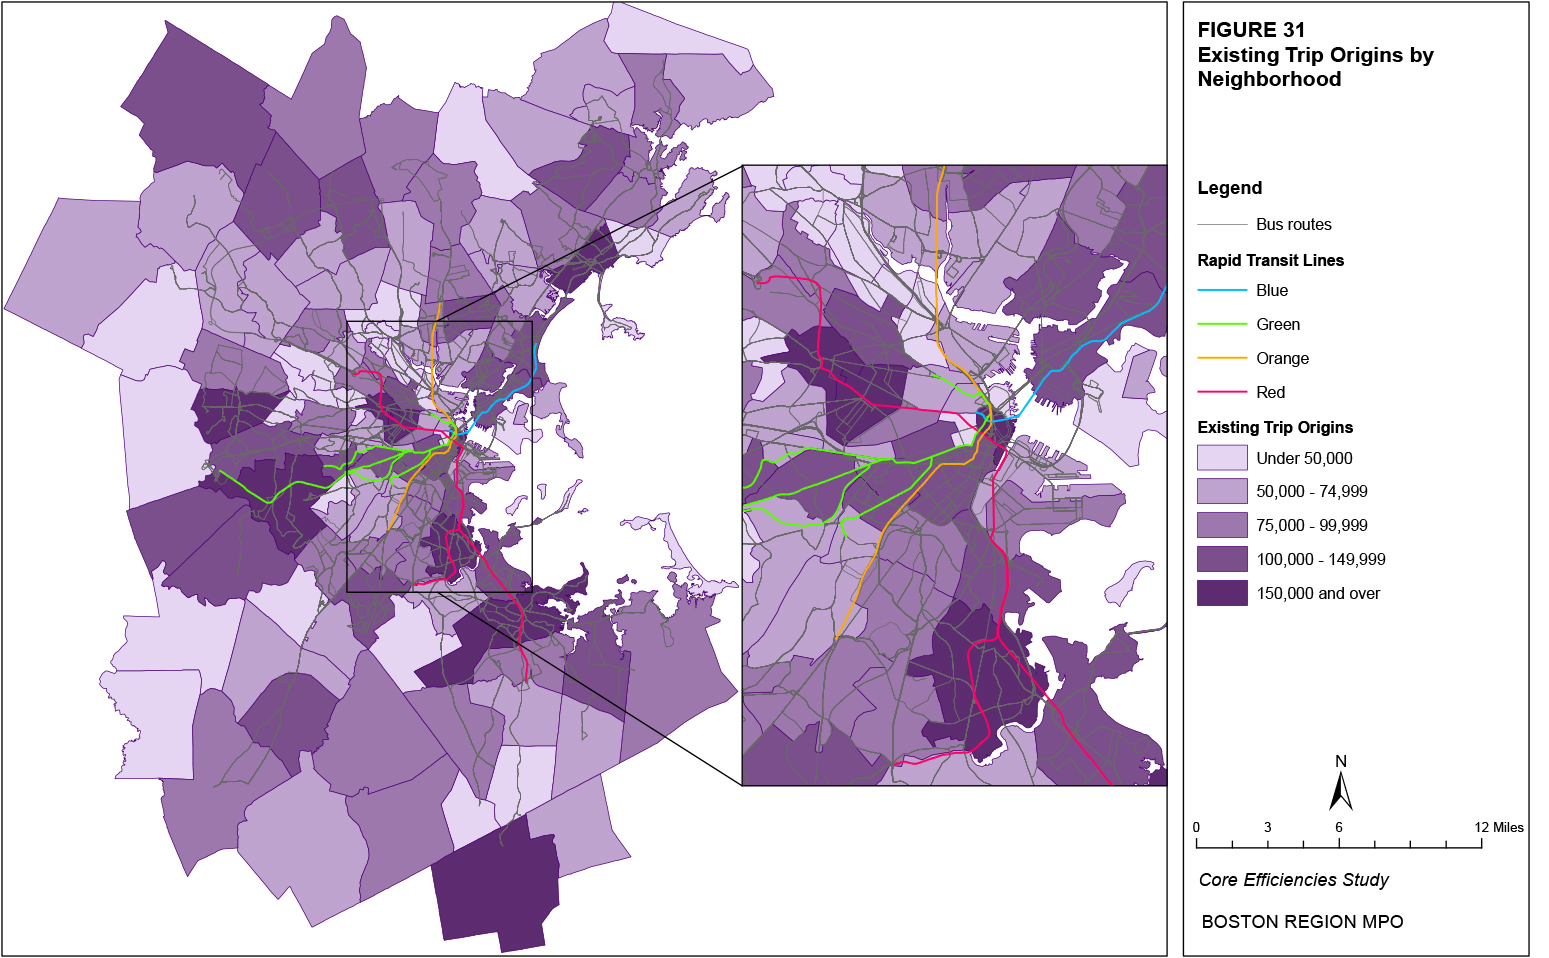 This map shows the number of existing trips originating from each neighborhood.